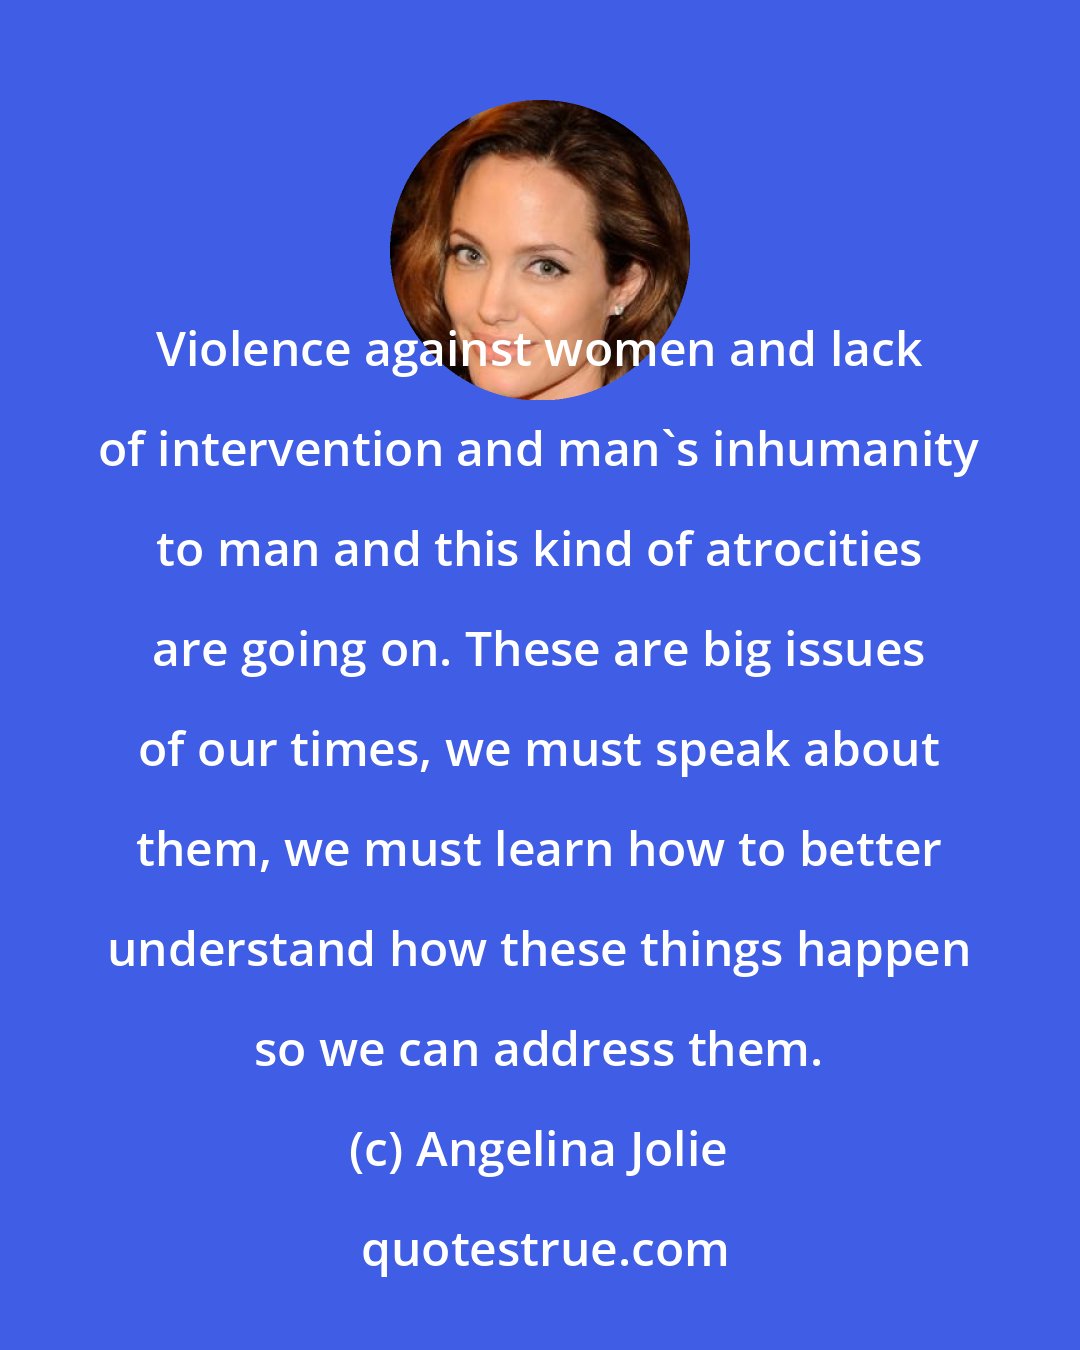 Angelina Jolie: Violence against women and lack of intervention and man's inhumanity to man and this kind of atrocities are going on. These are big issues of our times, we must speak about them, we must learn how to better understand how these things happen so we can address them.